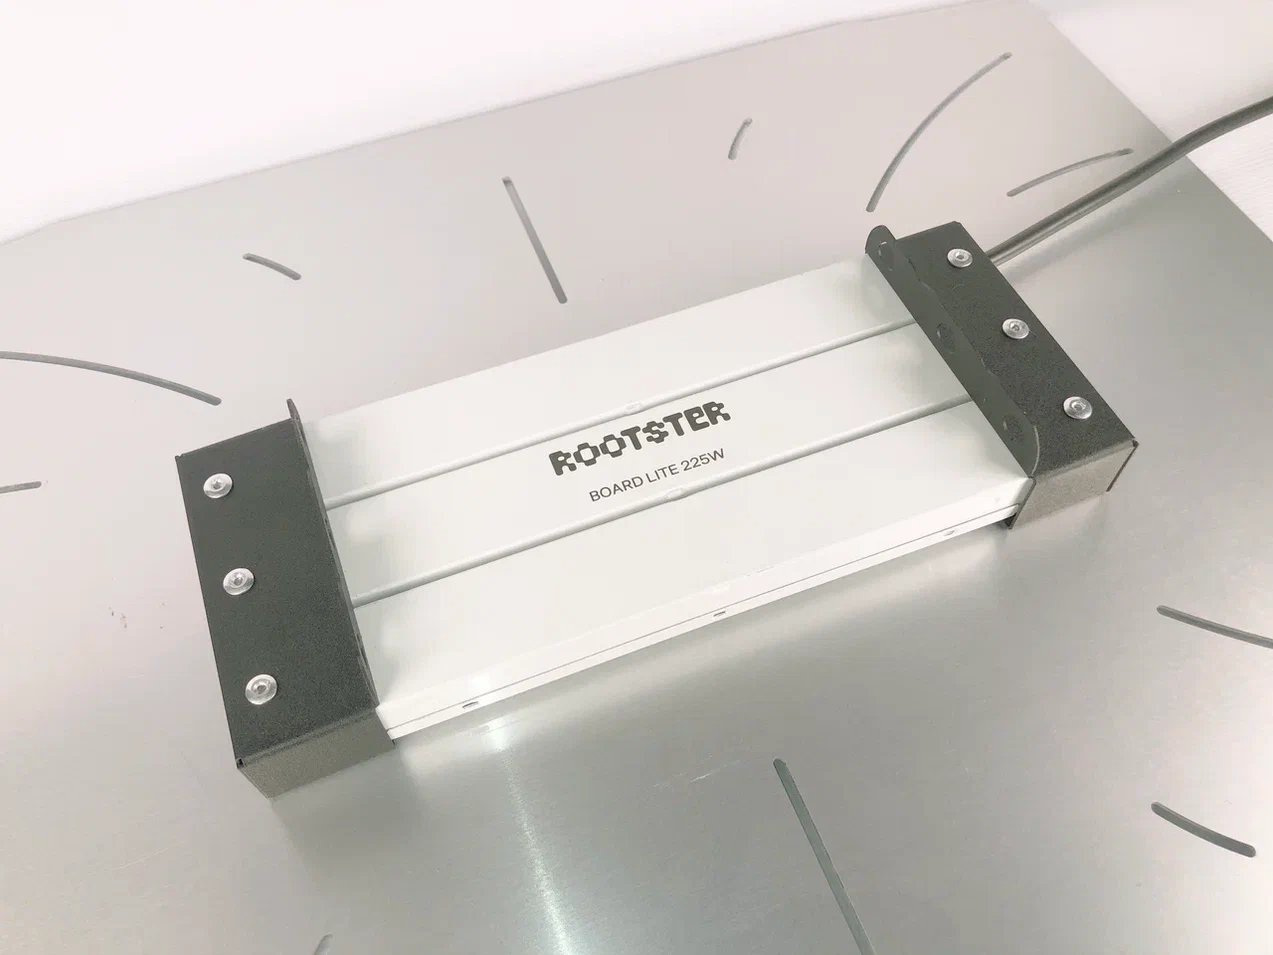 Rootster Board Lite 225w